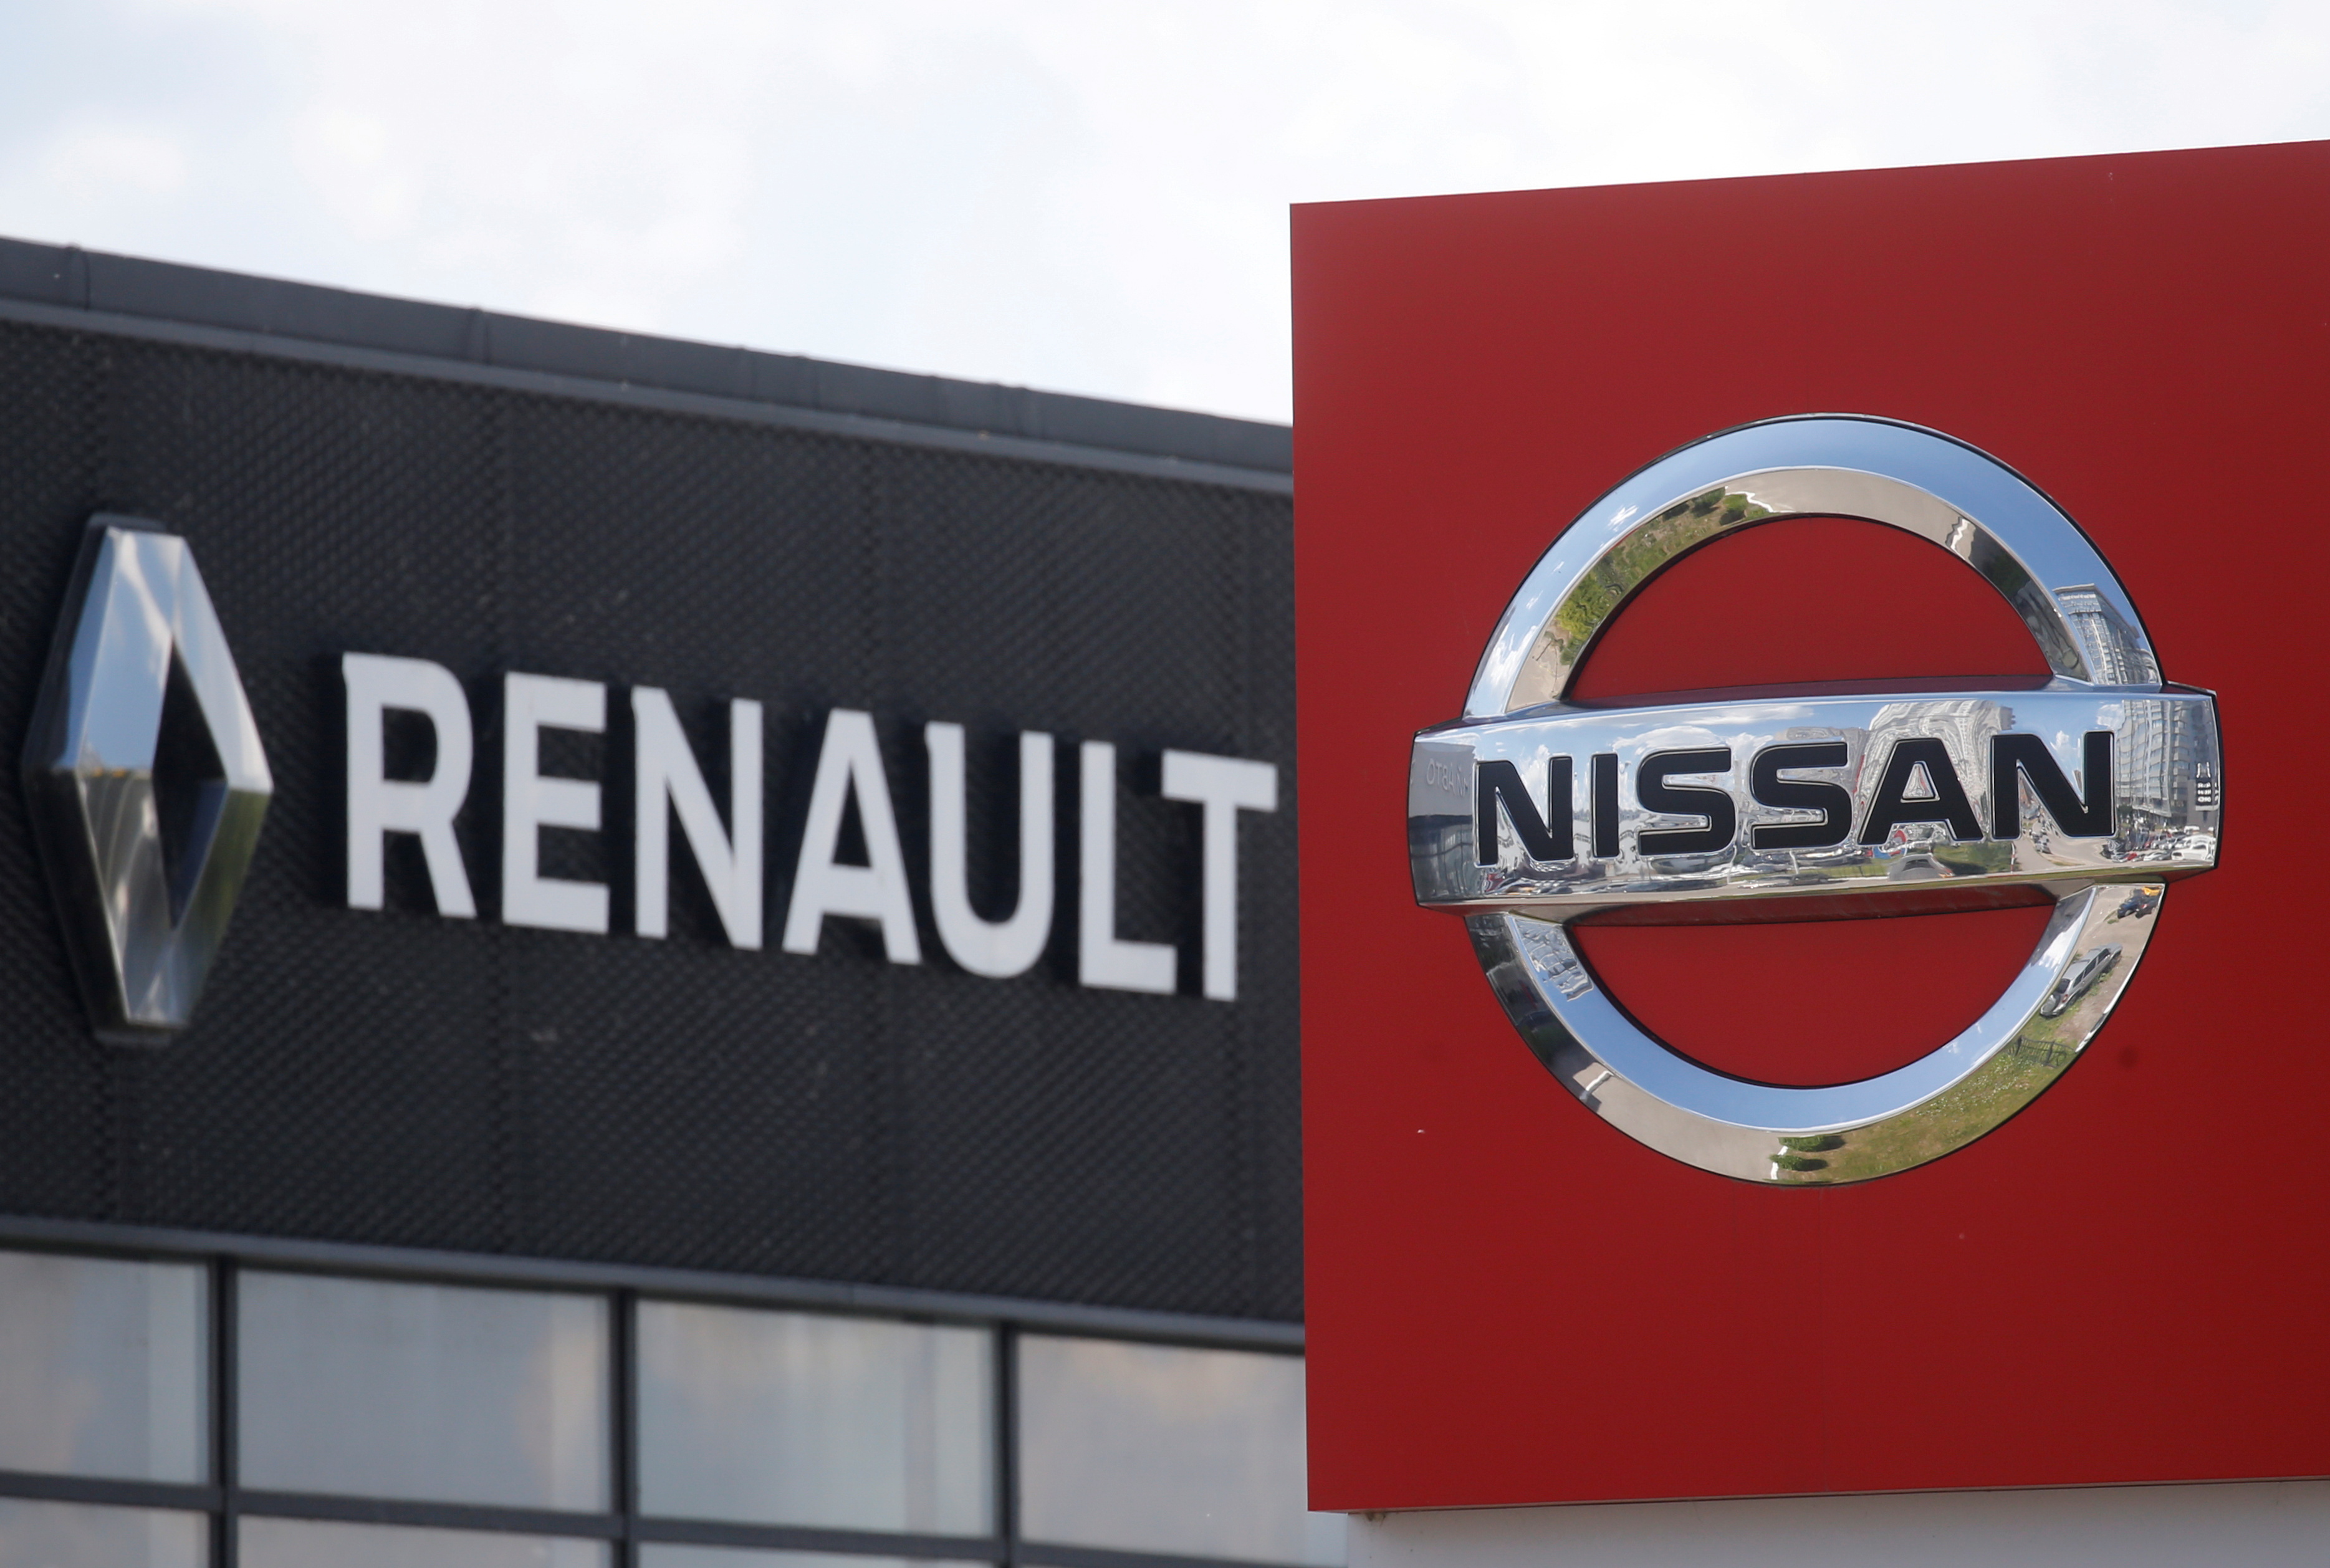 The logos of car manufacturers Nissan and Renault are pictured at a dealership Kyiv